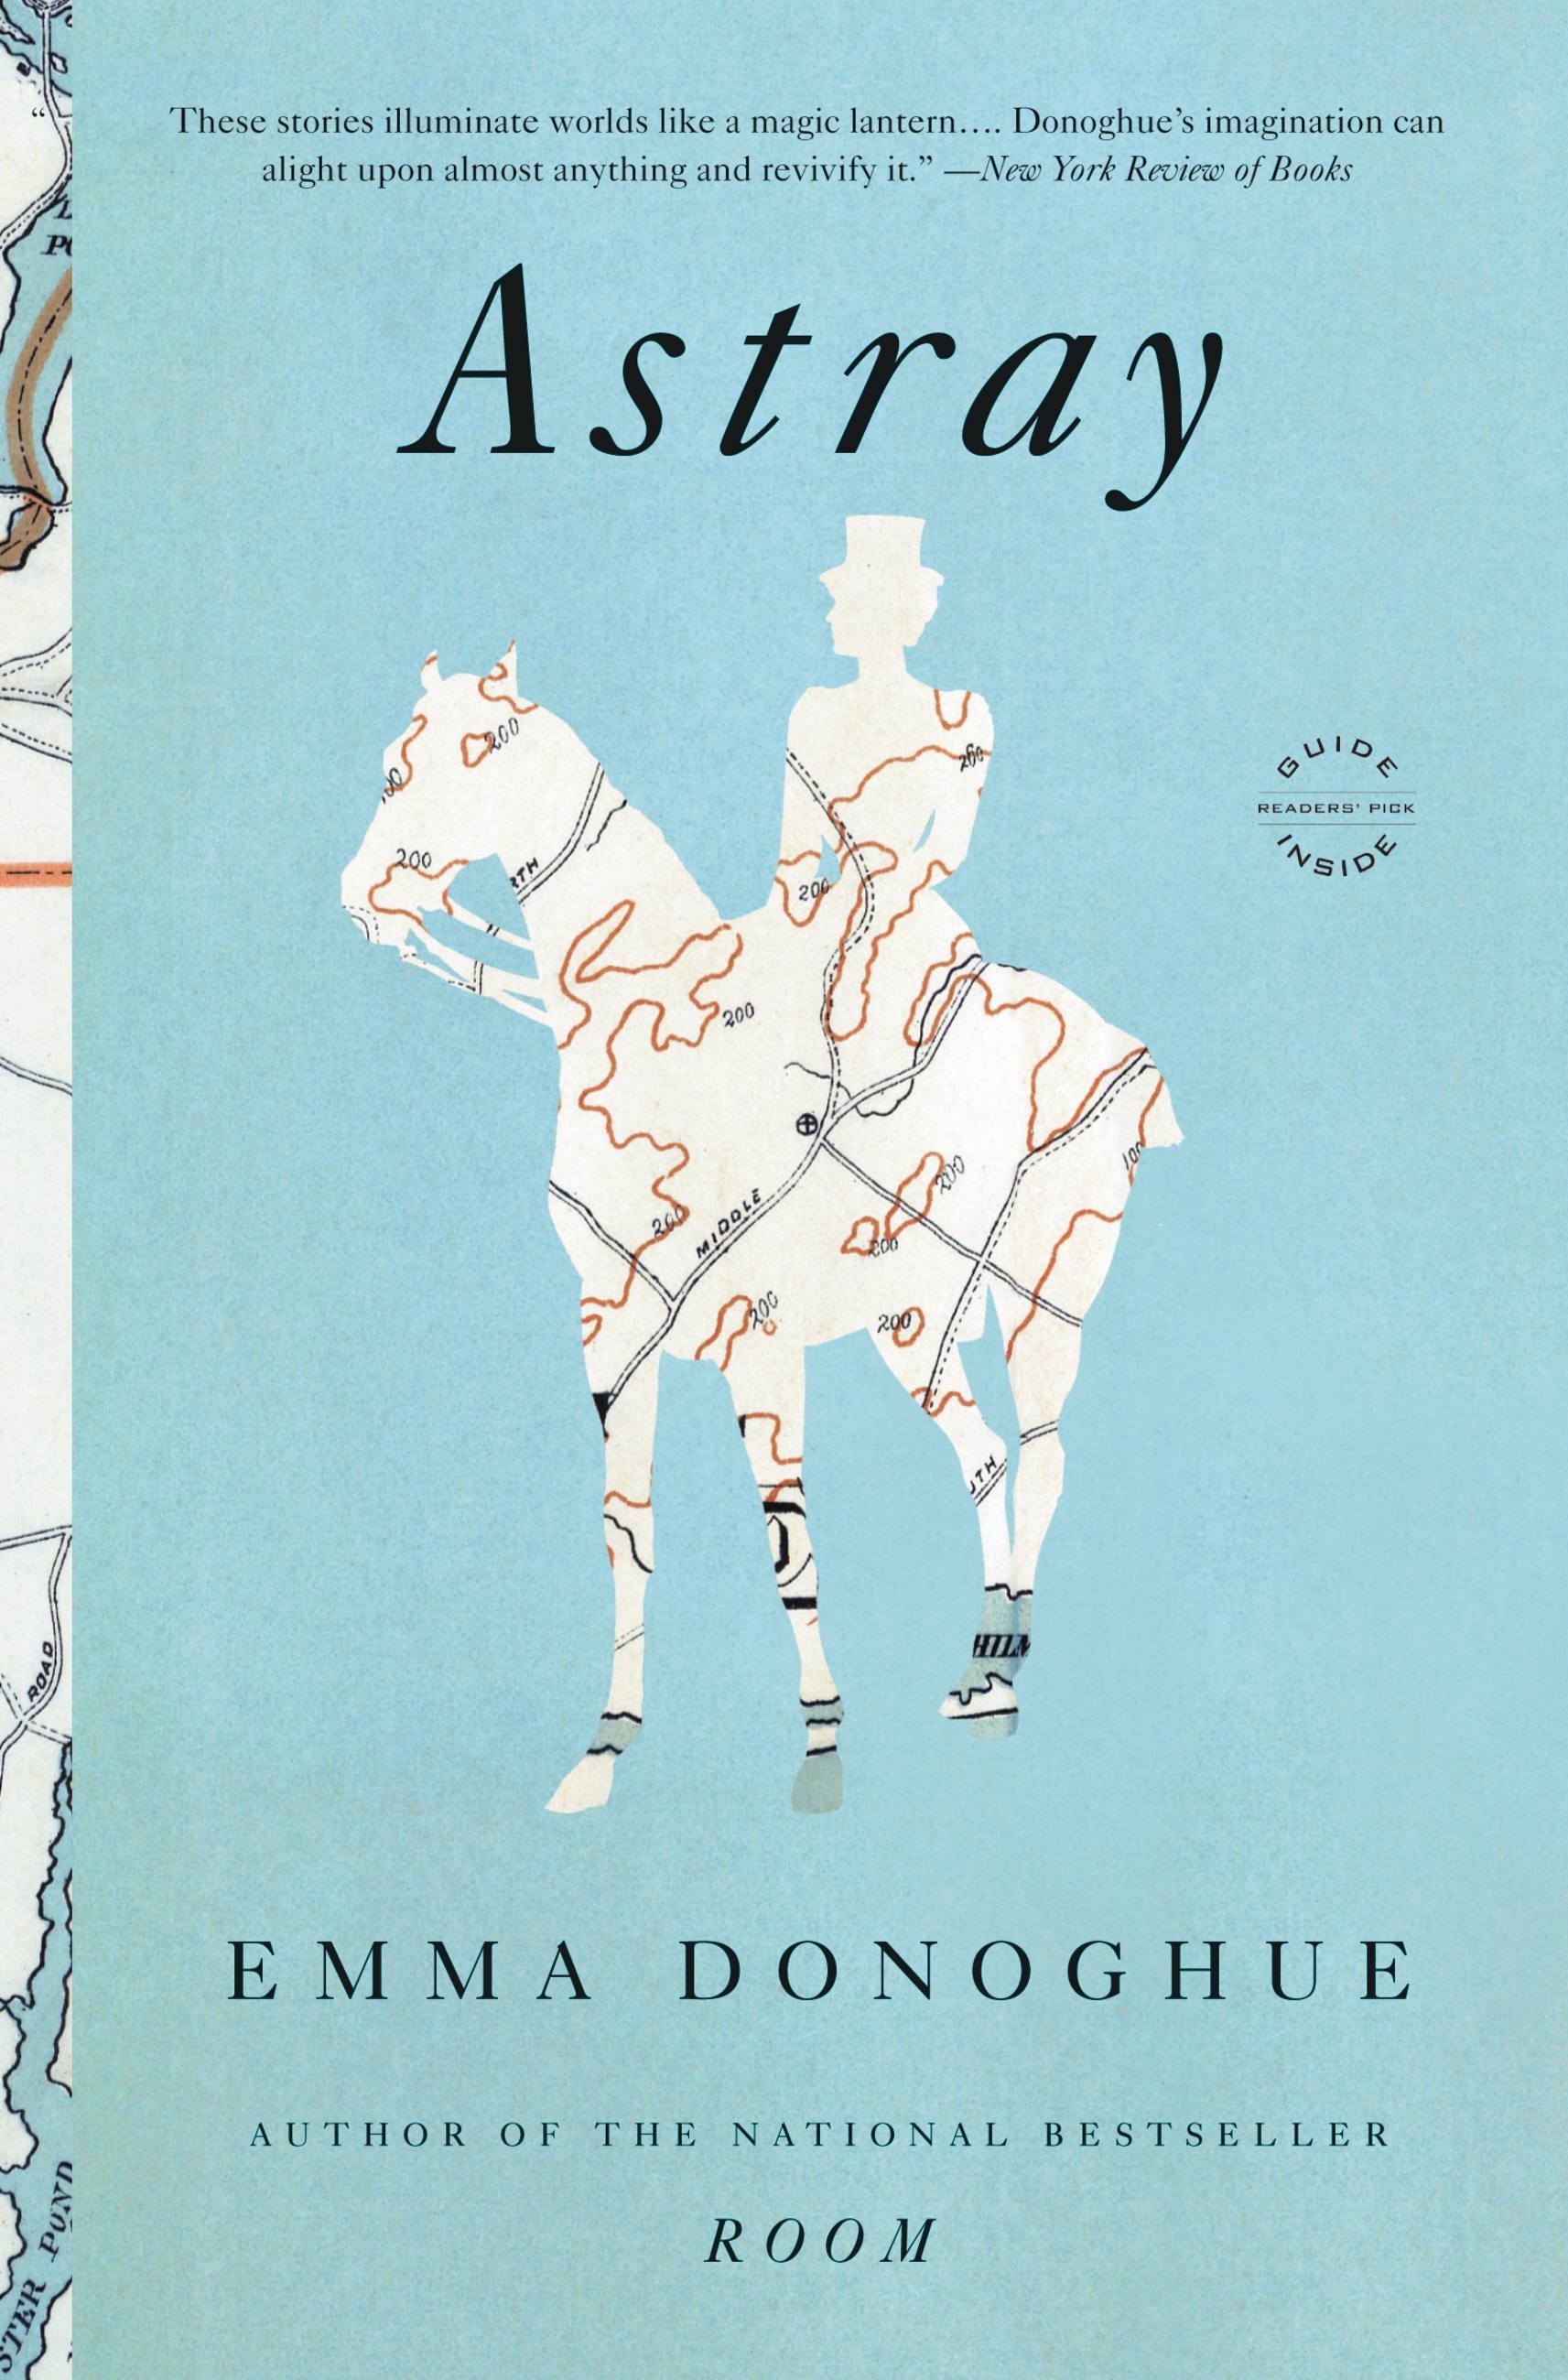 Astray by Emma Donoghue Hachette Book Group image